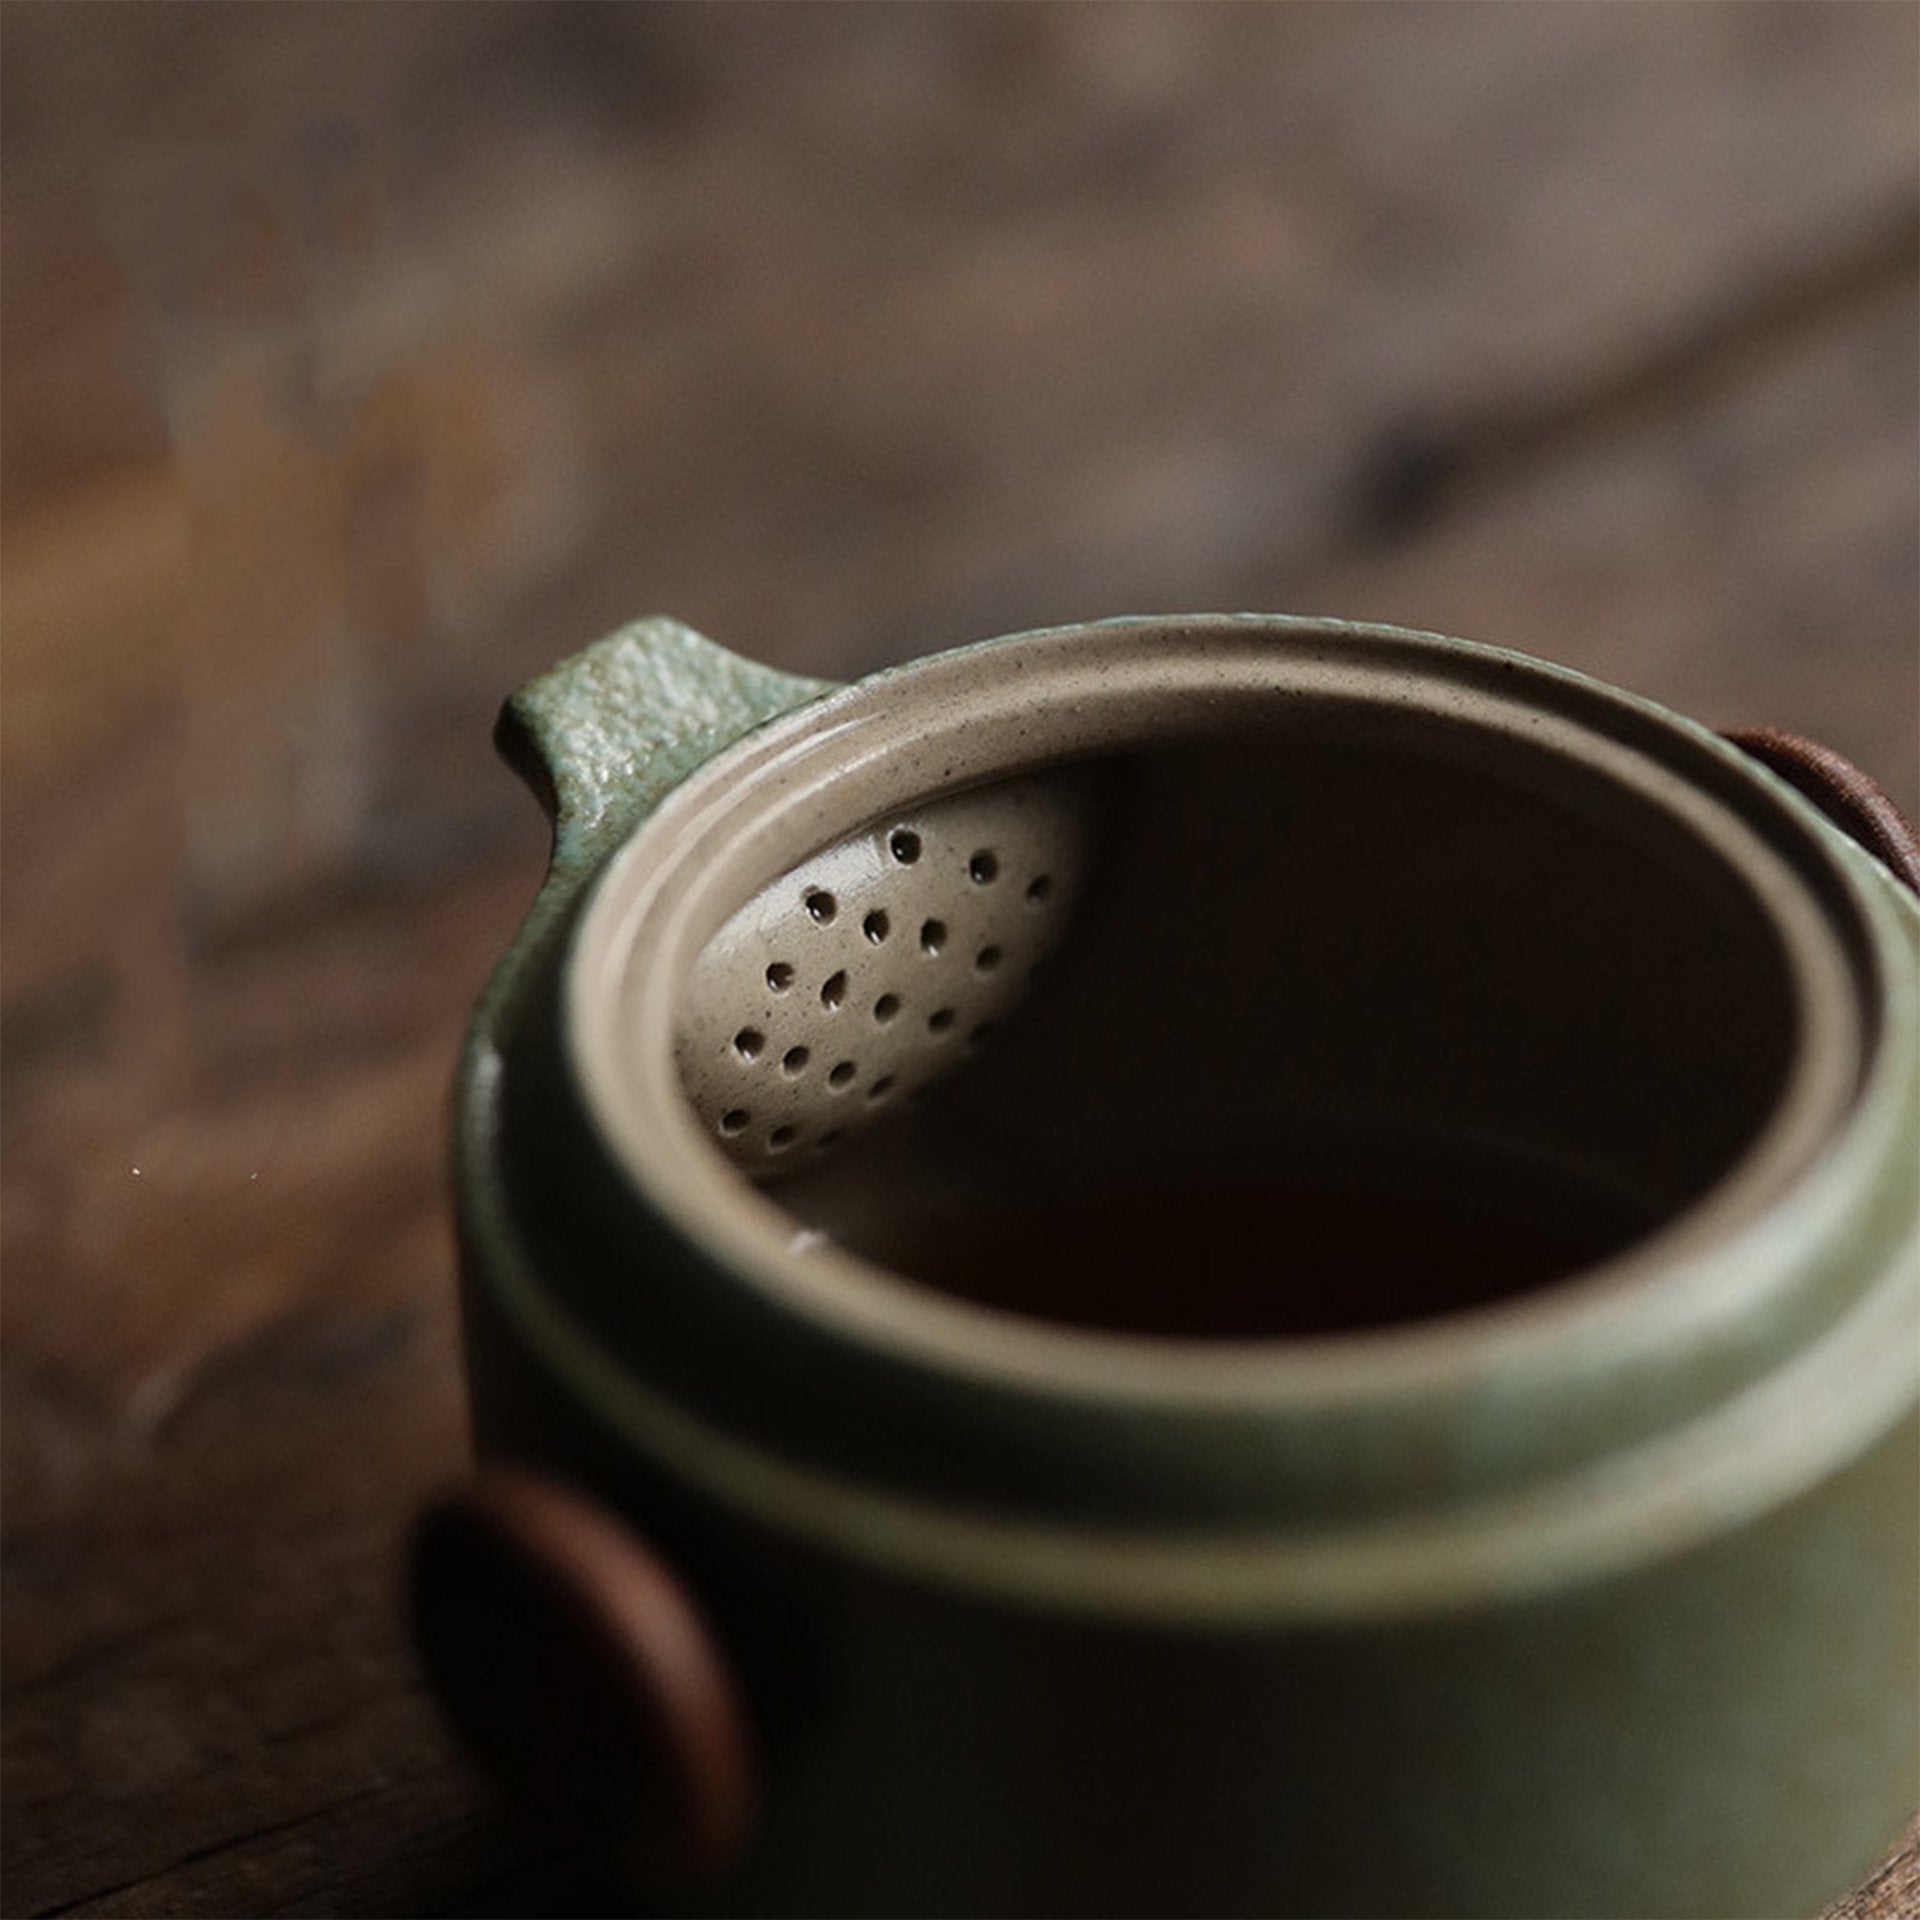 Green ceramic teapot with a strainer lid, partially open, on a wooden table.